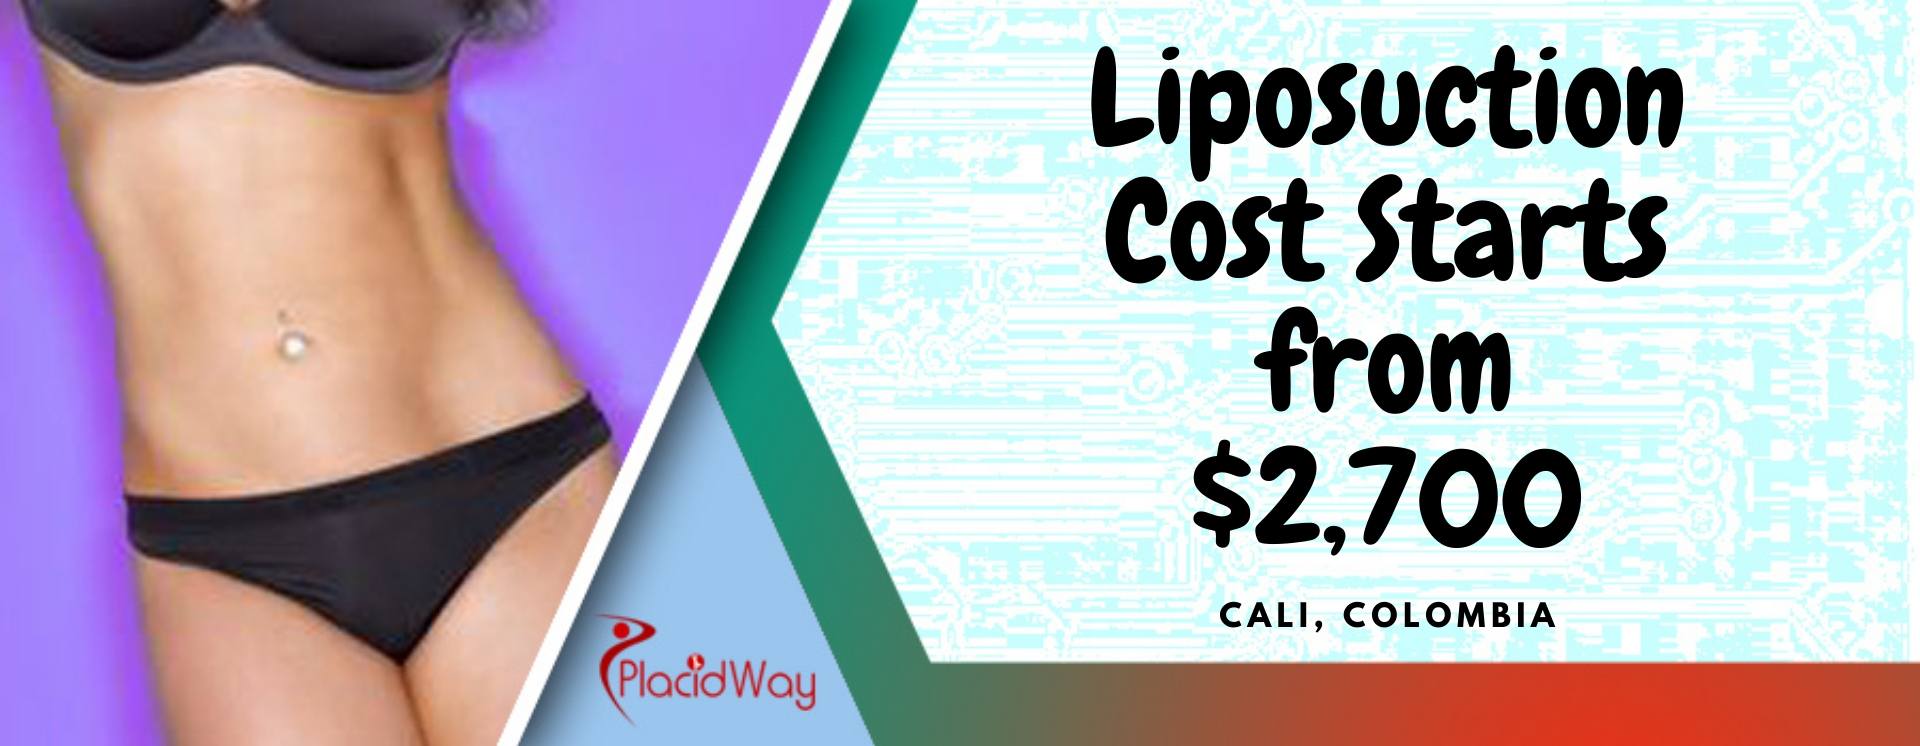 Liposuction Cost in Cali, Colombia